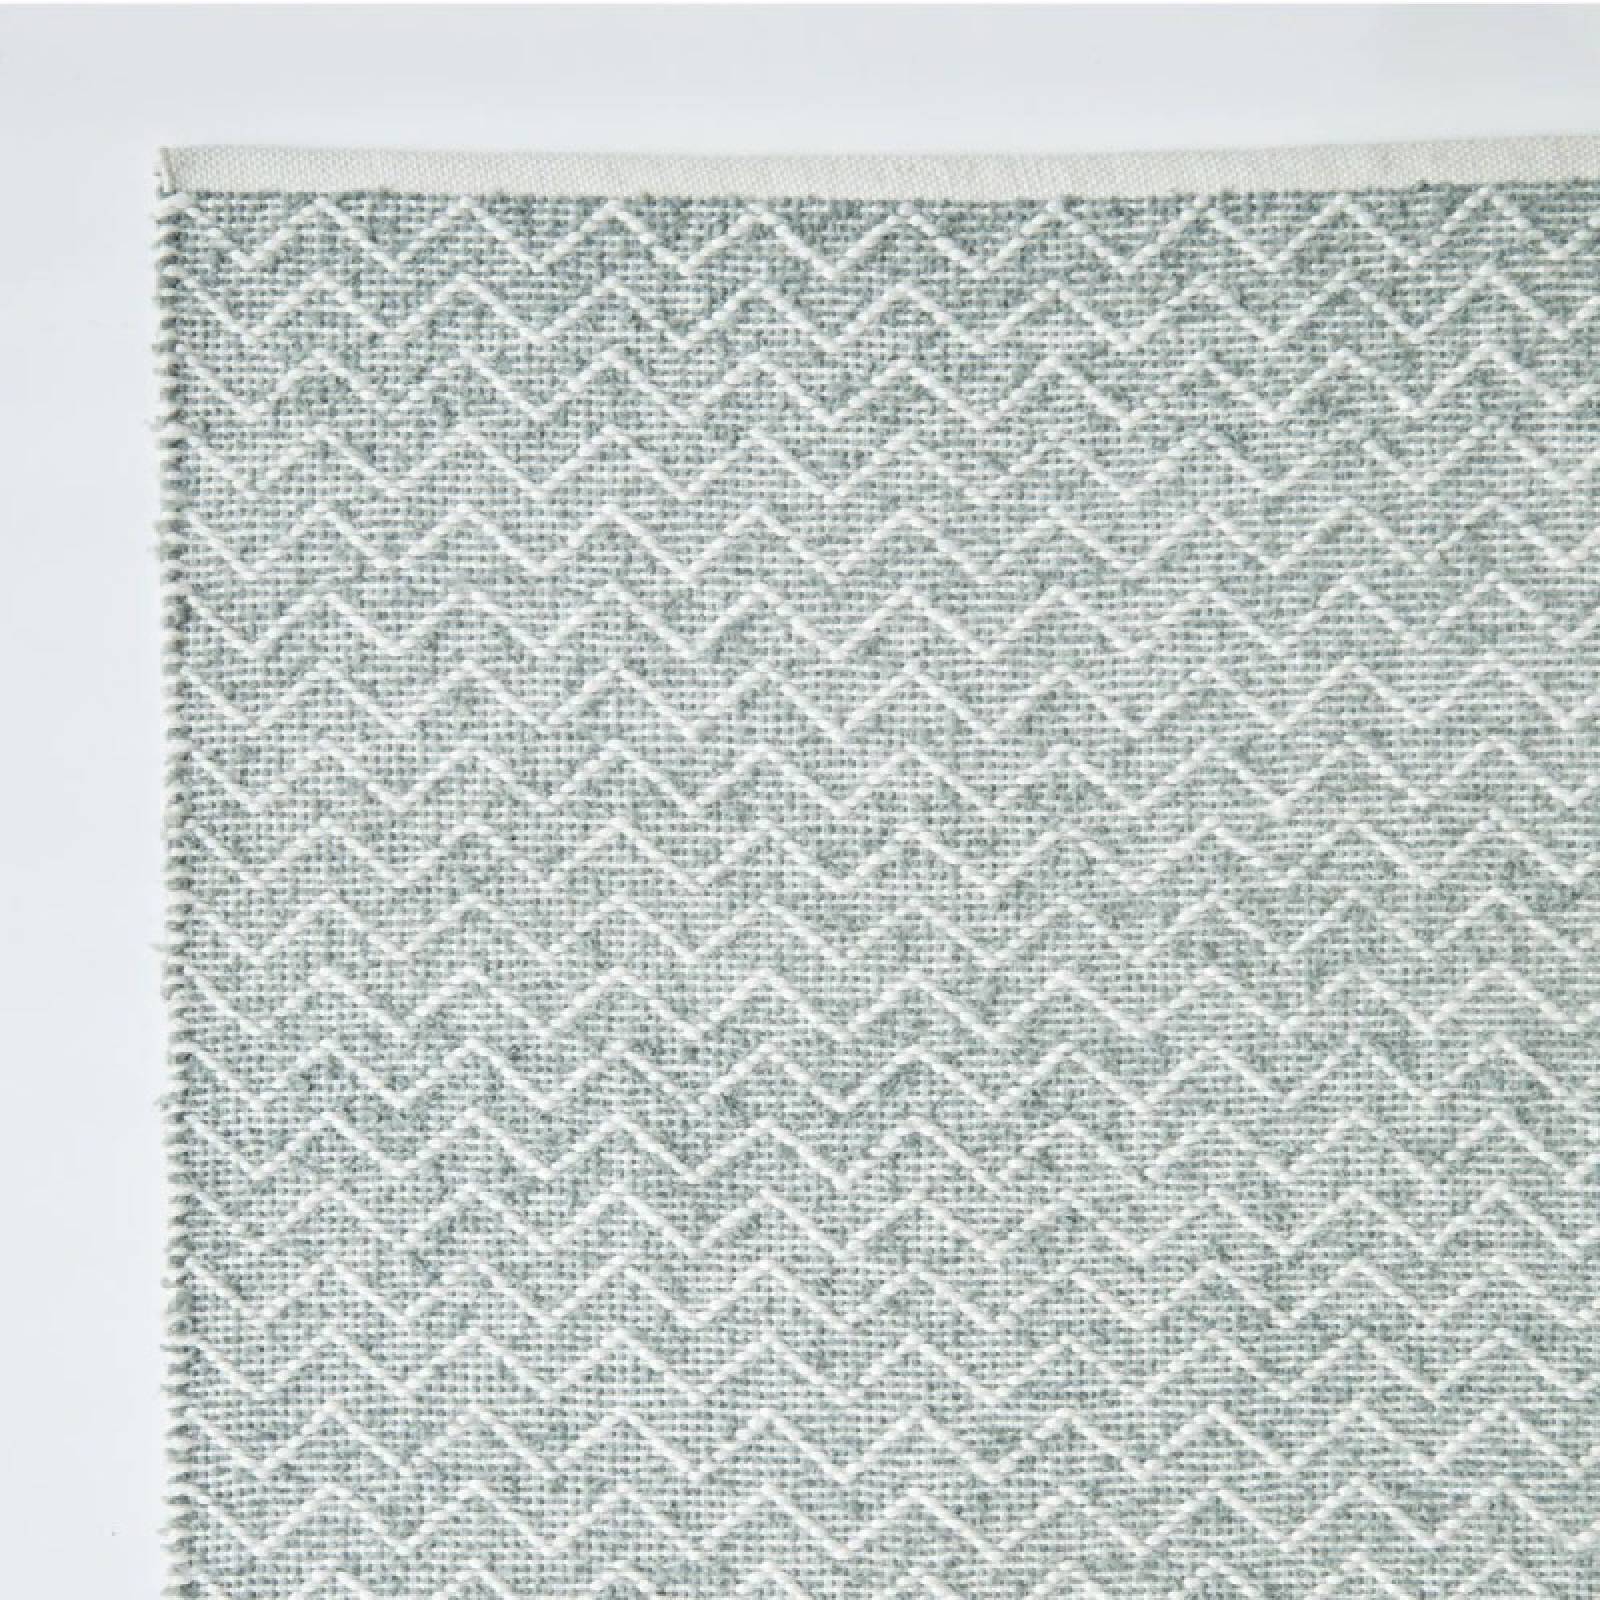 Chenille In Dove Grey 90x60cm Recycled Bottle Rug